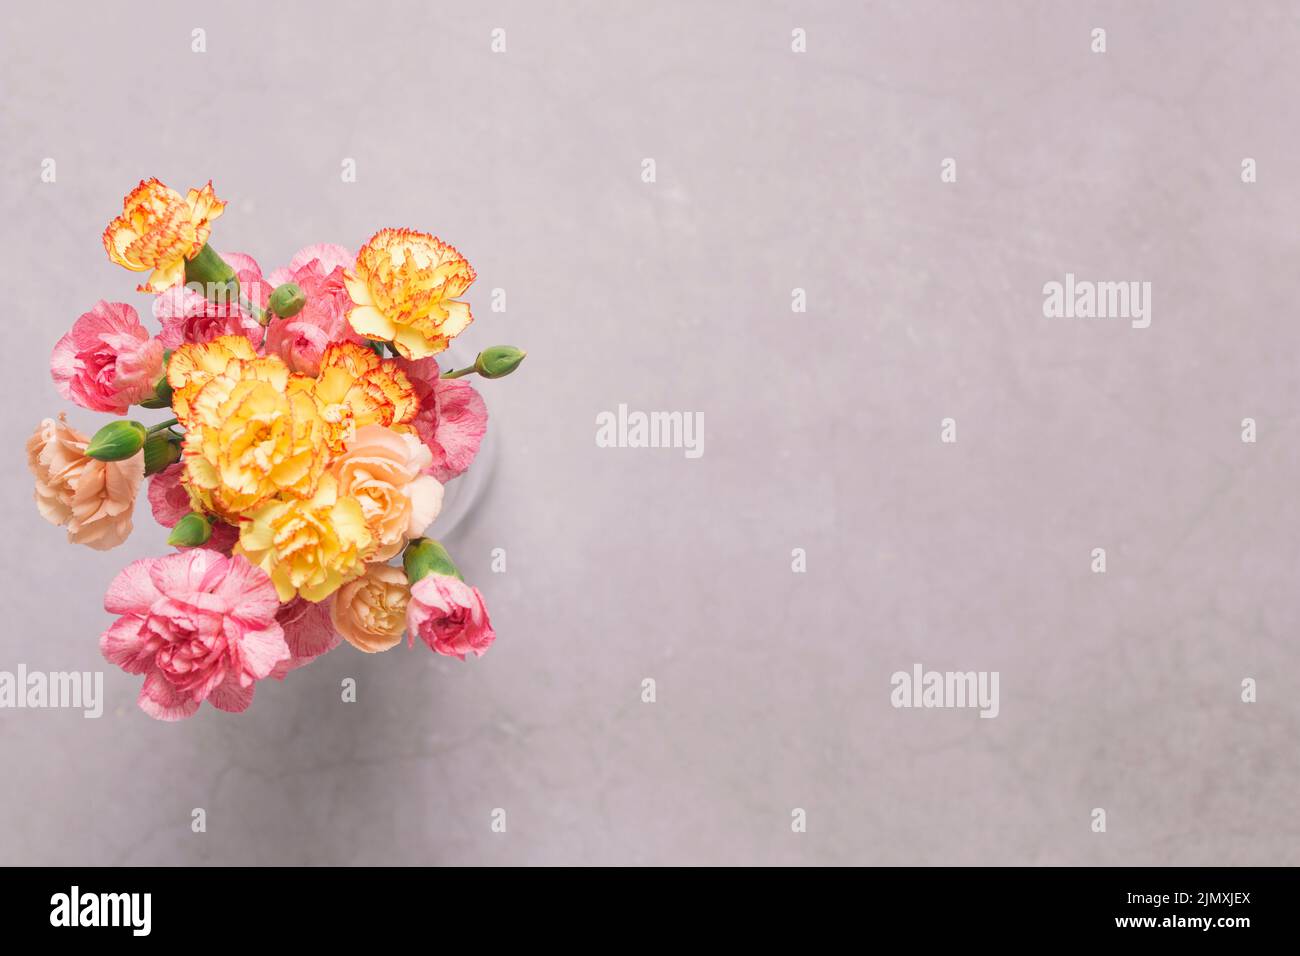 Vase with lovely carnations Stock Photo